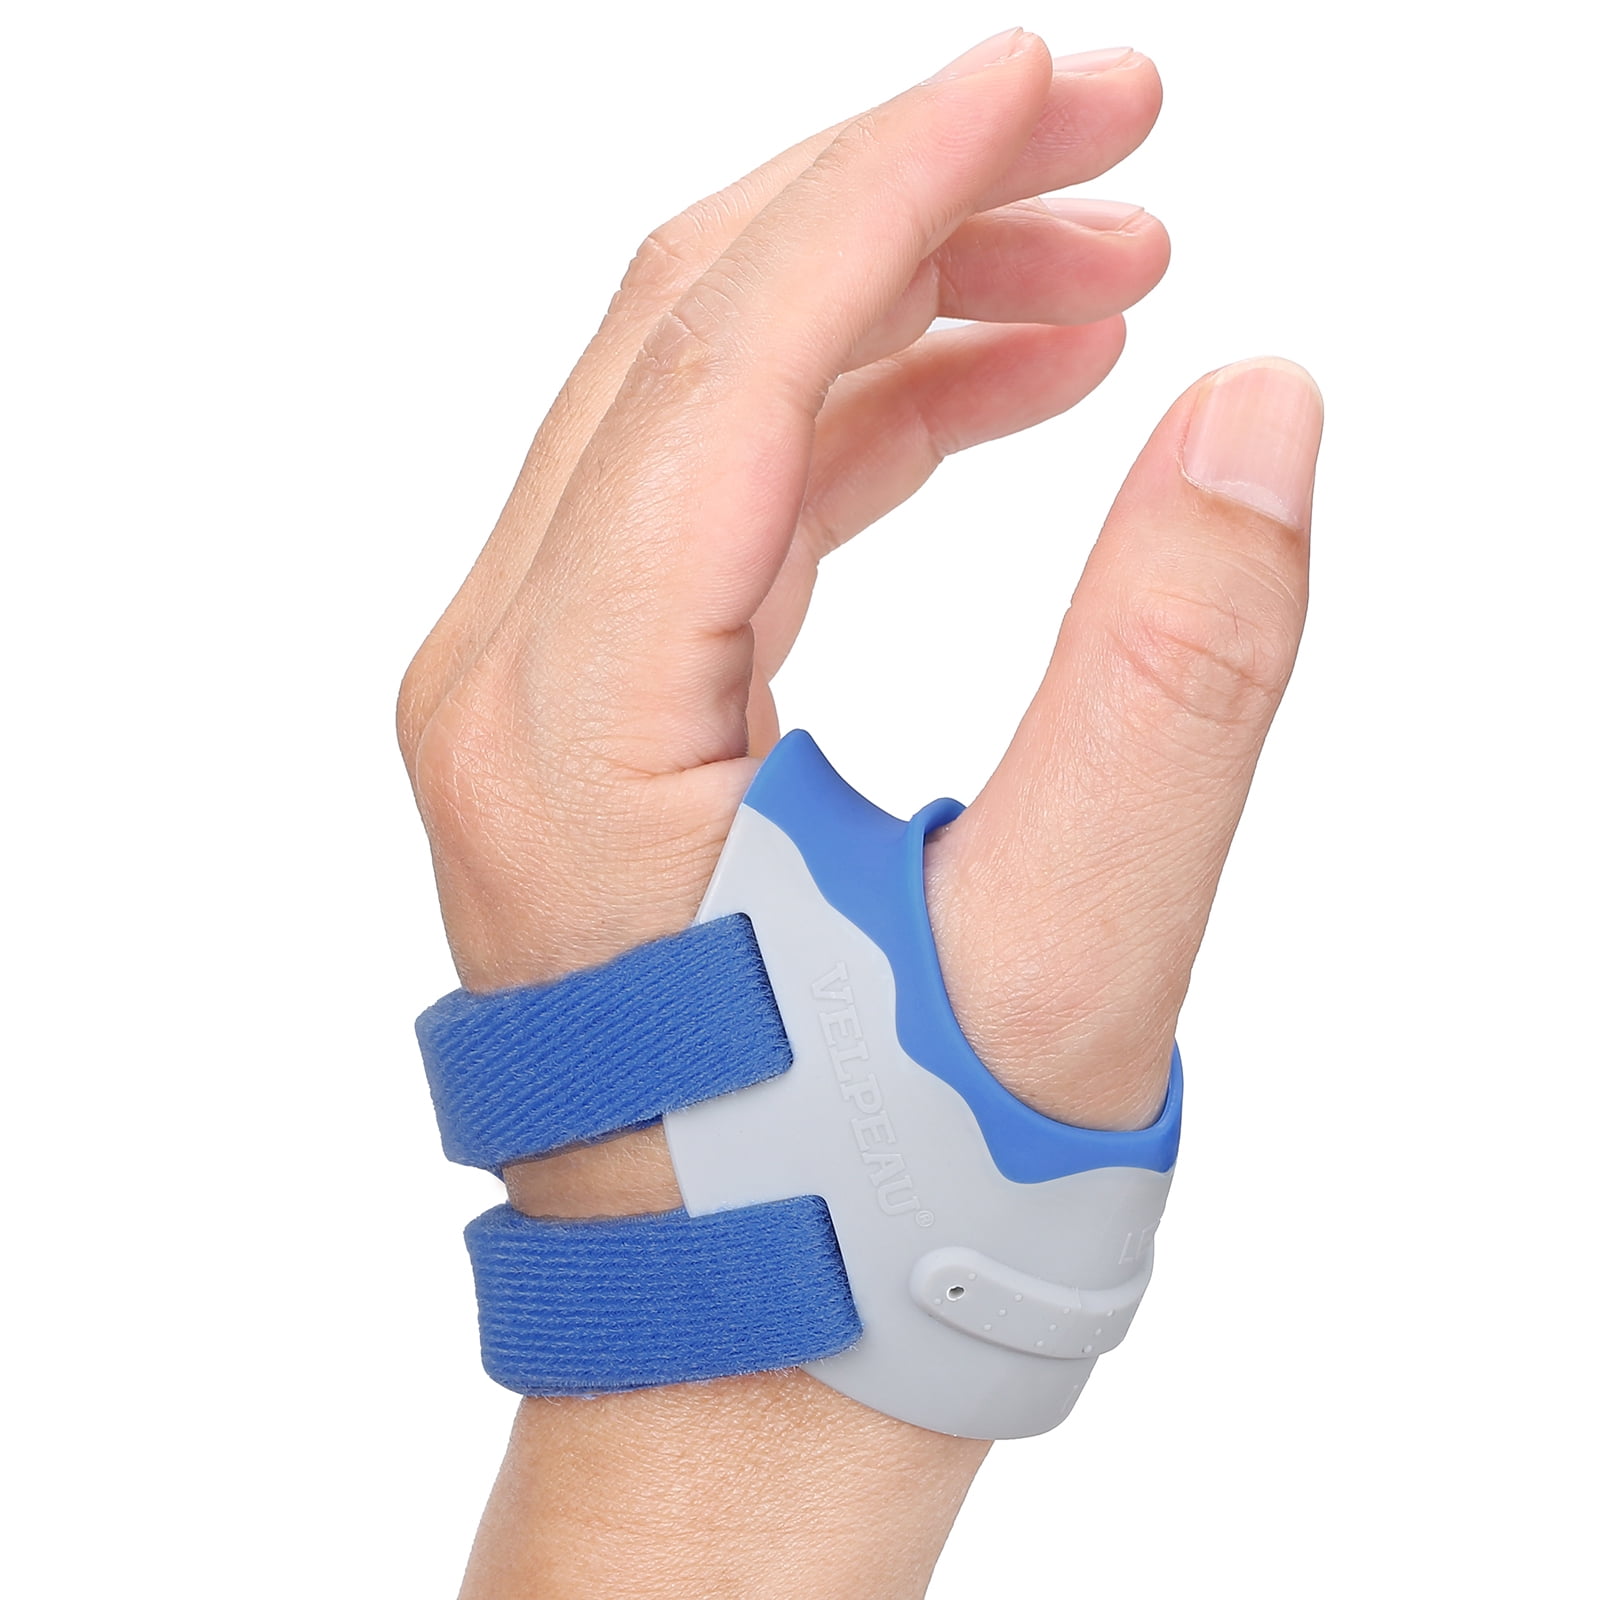 VELPEAU Adjustable Thumb Support Brace - CMC Joint Stabilizer Orthosis,  Unisex 